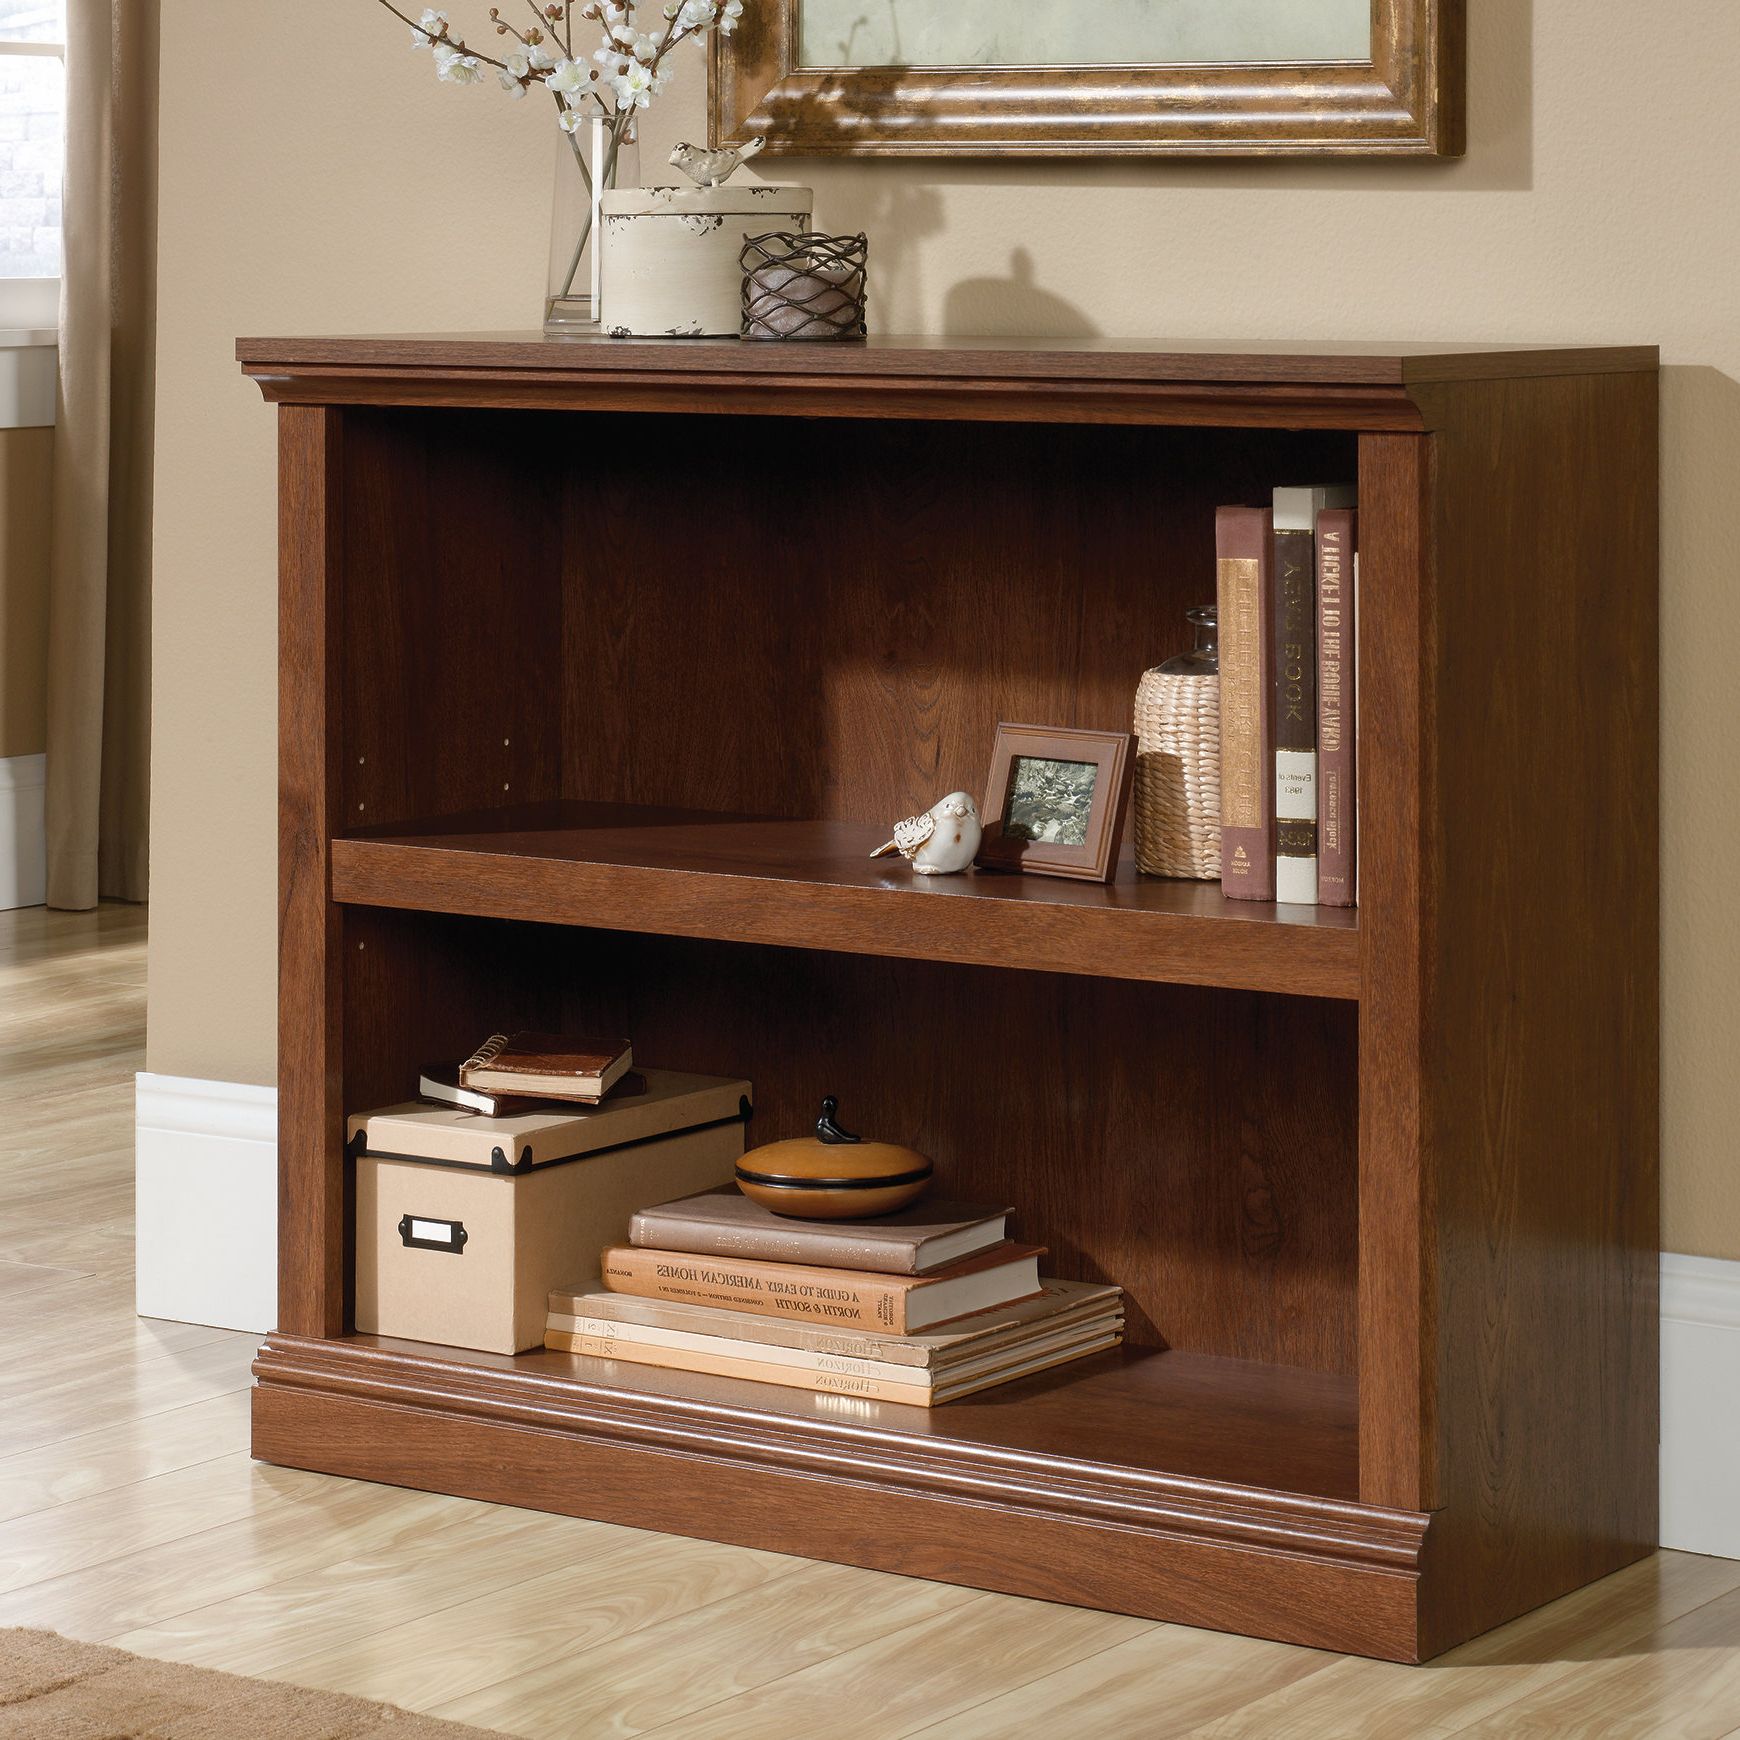 Gianni Standard Bookcase For Best And Newest Kirkbride Standard Bookcases (View 11 of 20)